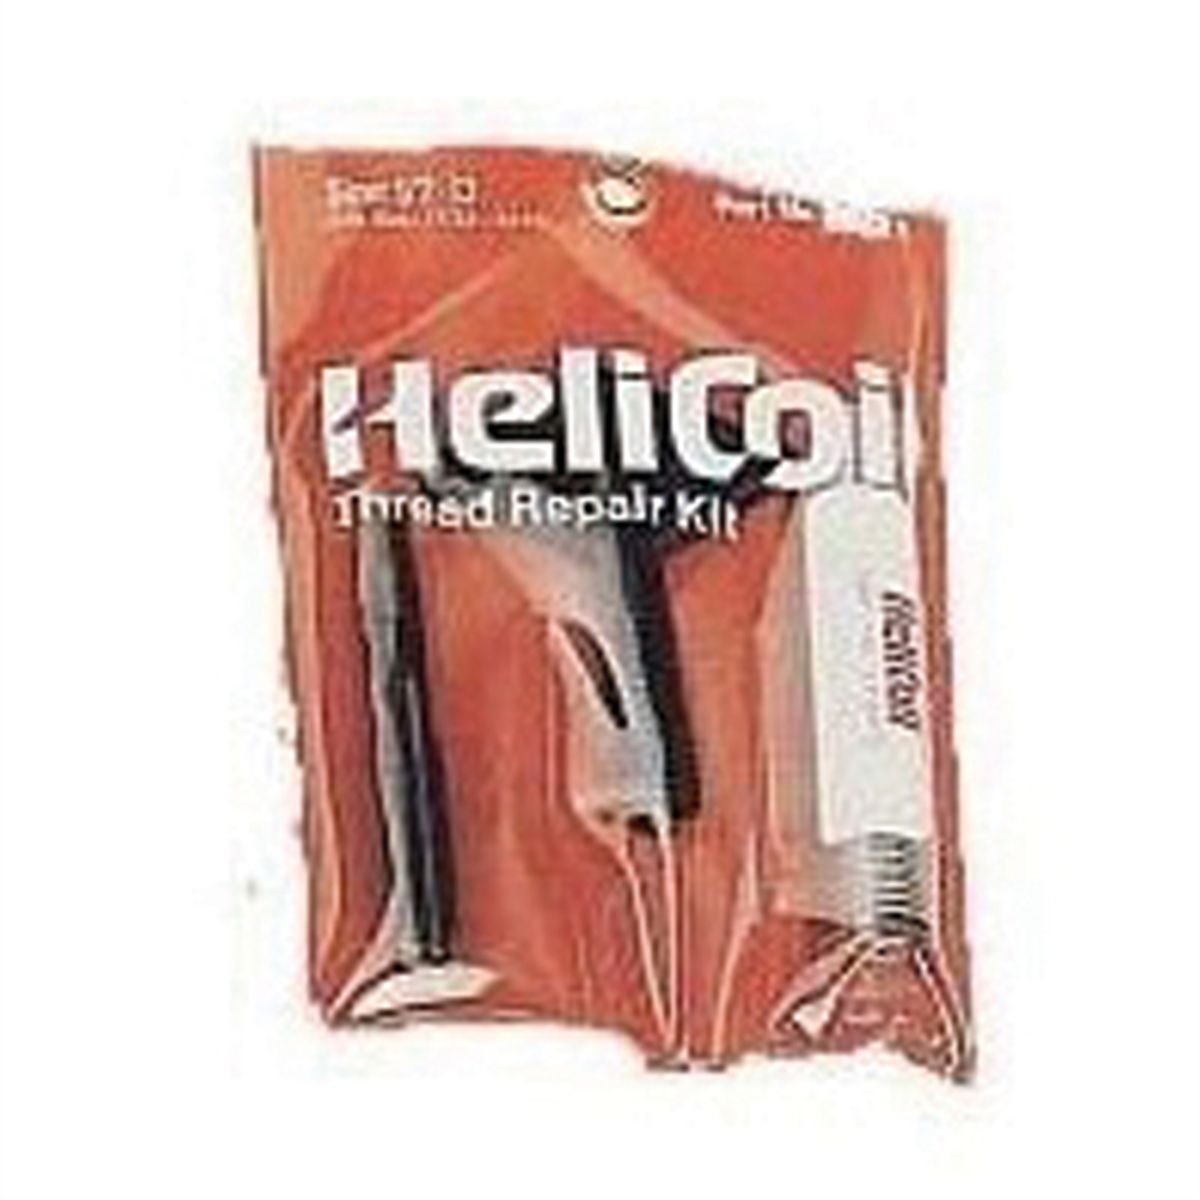 HeliCoil 5/16-24 x .469 inch Thread Repair Inserts Qty 25 